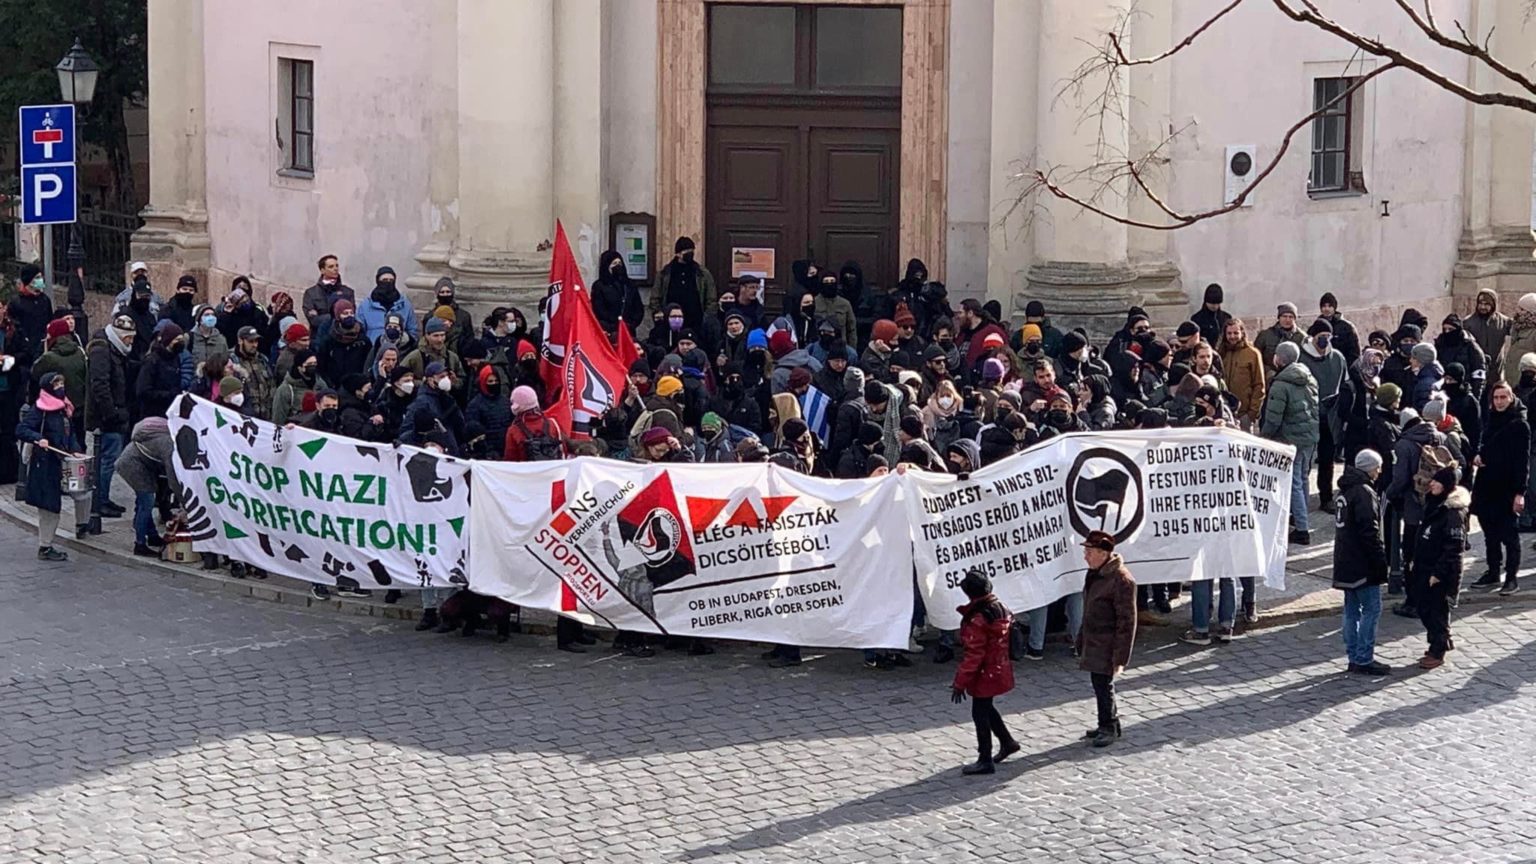 Anti-fascists protest annual neo-Nazi gathering in Budapest : Peoples ...